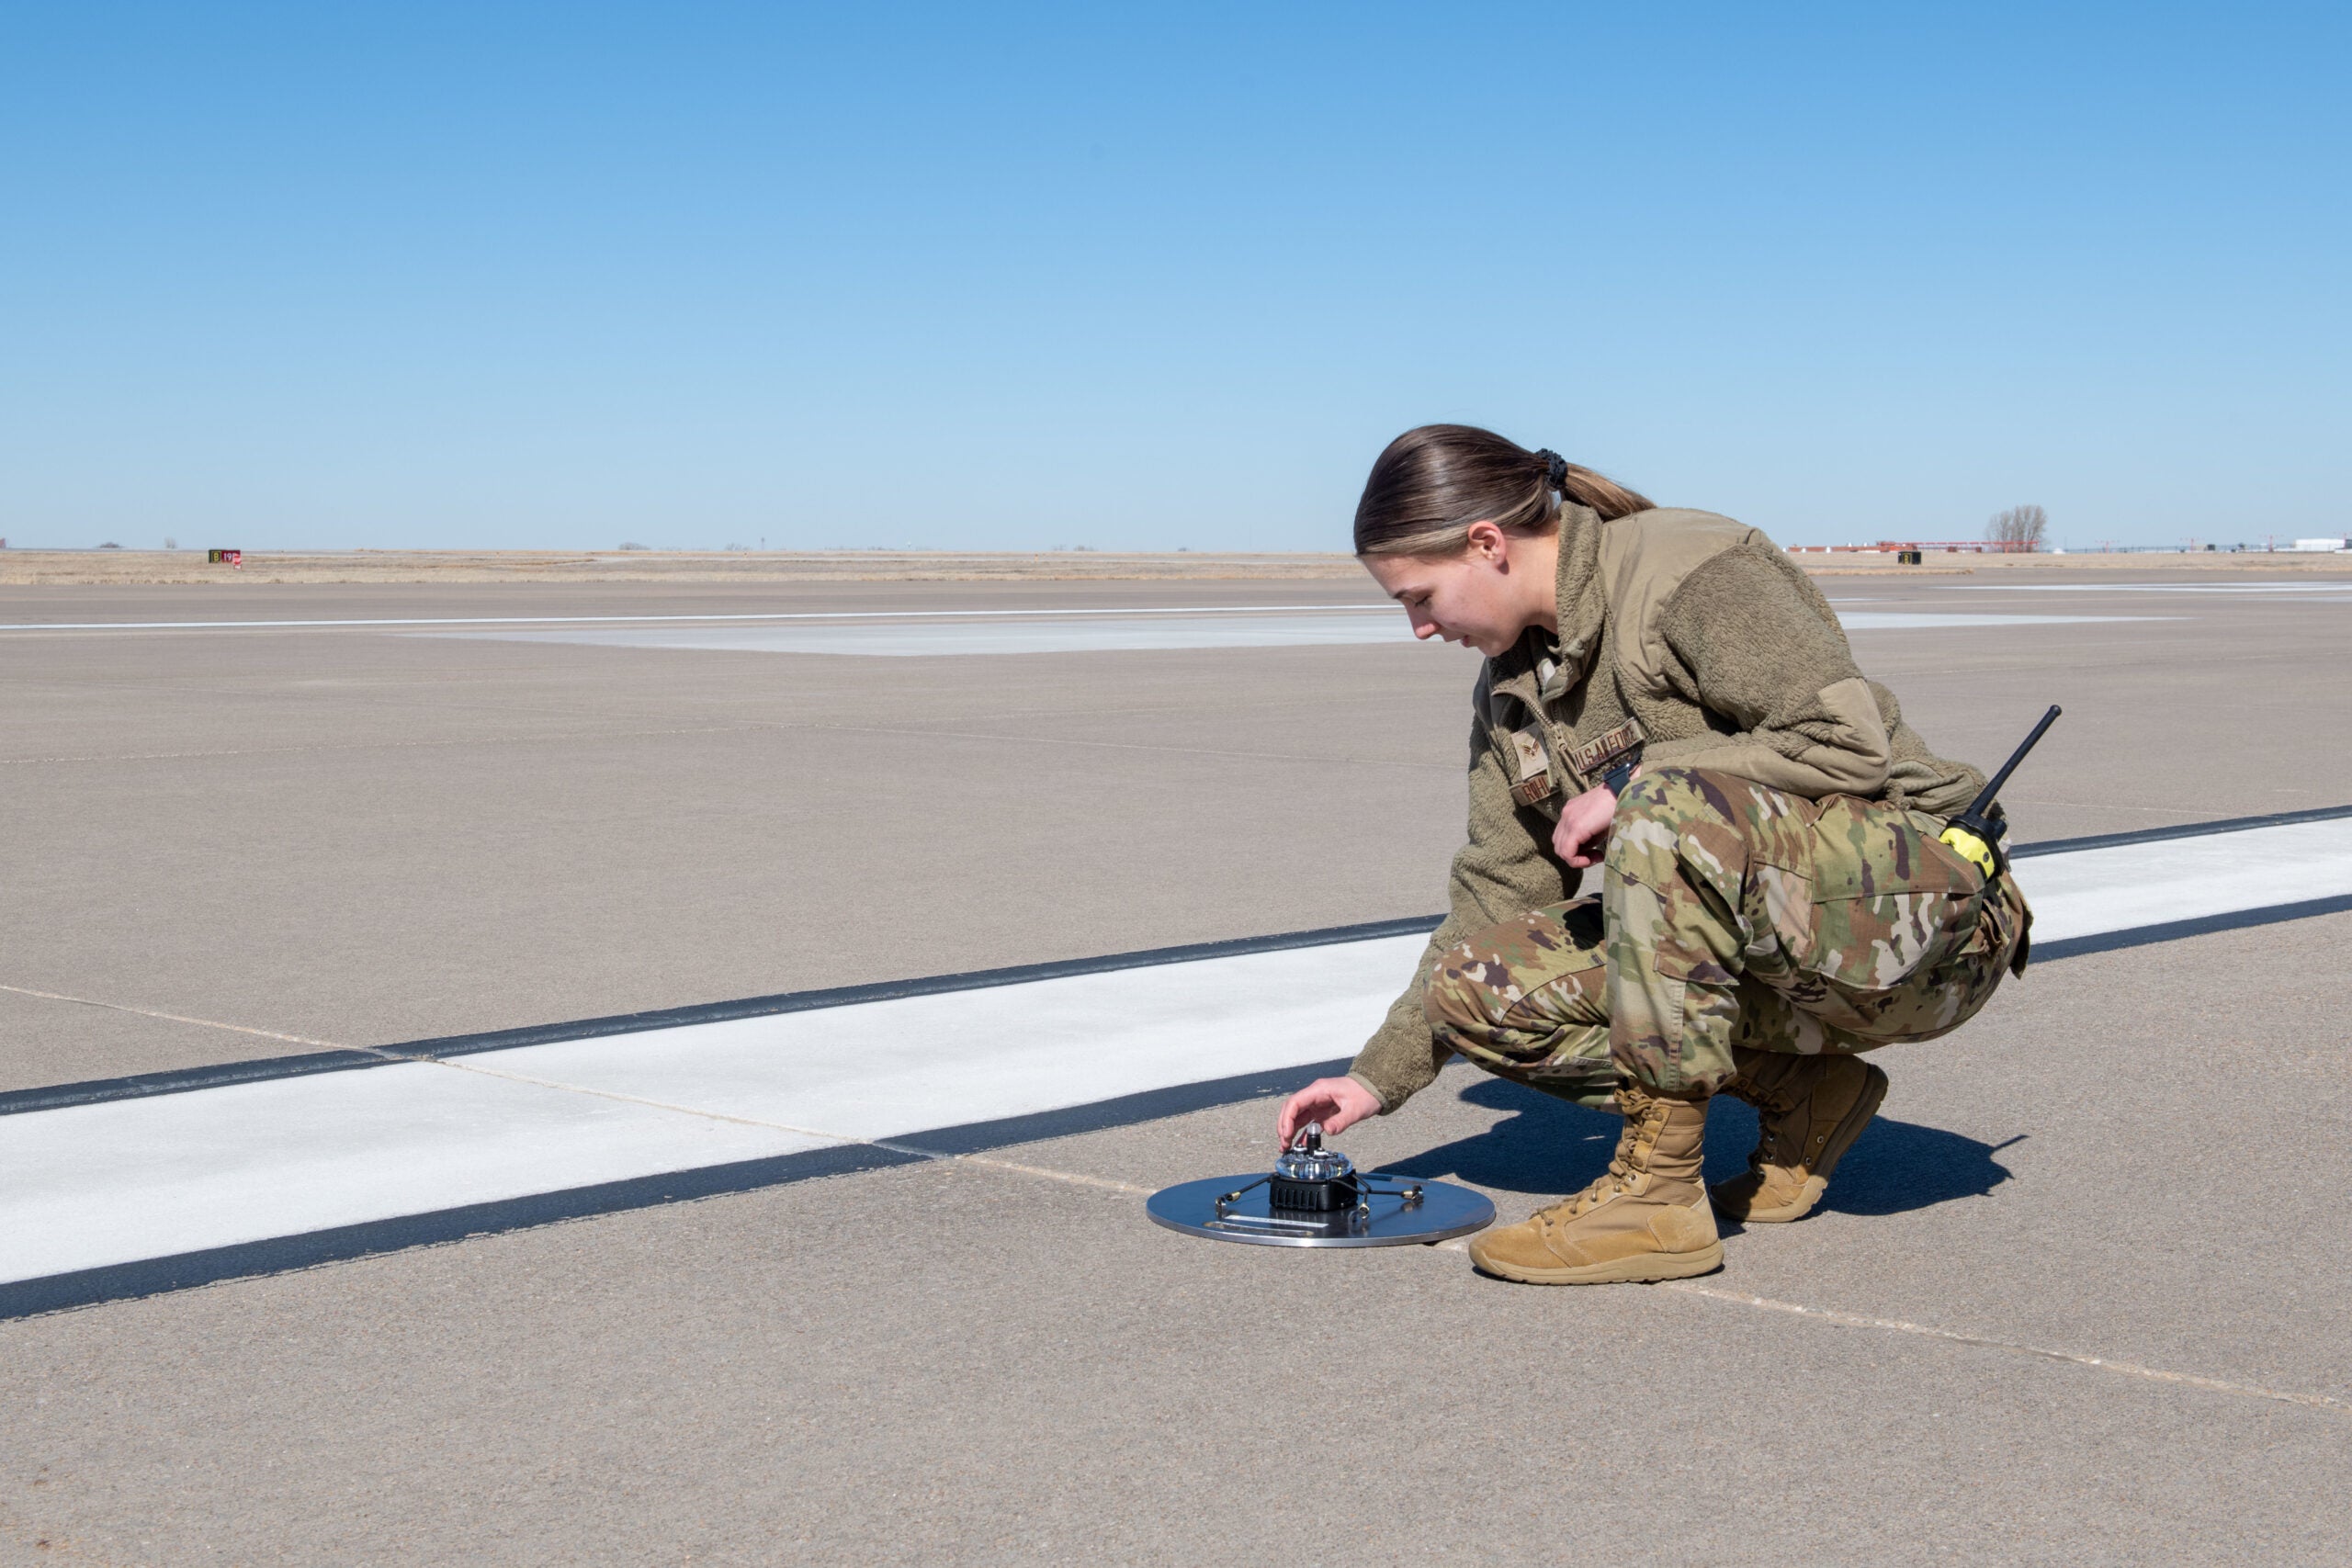 Senior Airman Genavieve Rohling, 22nd Operations Support Squadron, airfield management shift lead, places a Phantom ALZ-15 portable landing zone light on the runway in preparation for Airfield Marking Patterns (AMP)-3 system training at McConnell Air Force Base, Kansas, Feb. 17, 2023. AMP-3 is a standard set of marking used to identify runways and other areas of an airport or landing zones. (U.S. Air Force photo by Staff Sgt. Adam Goodly)